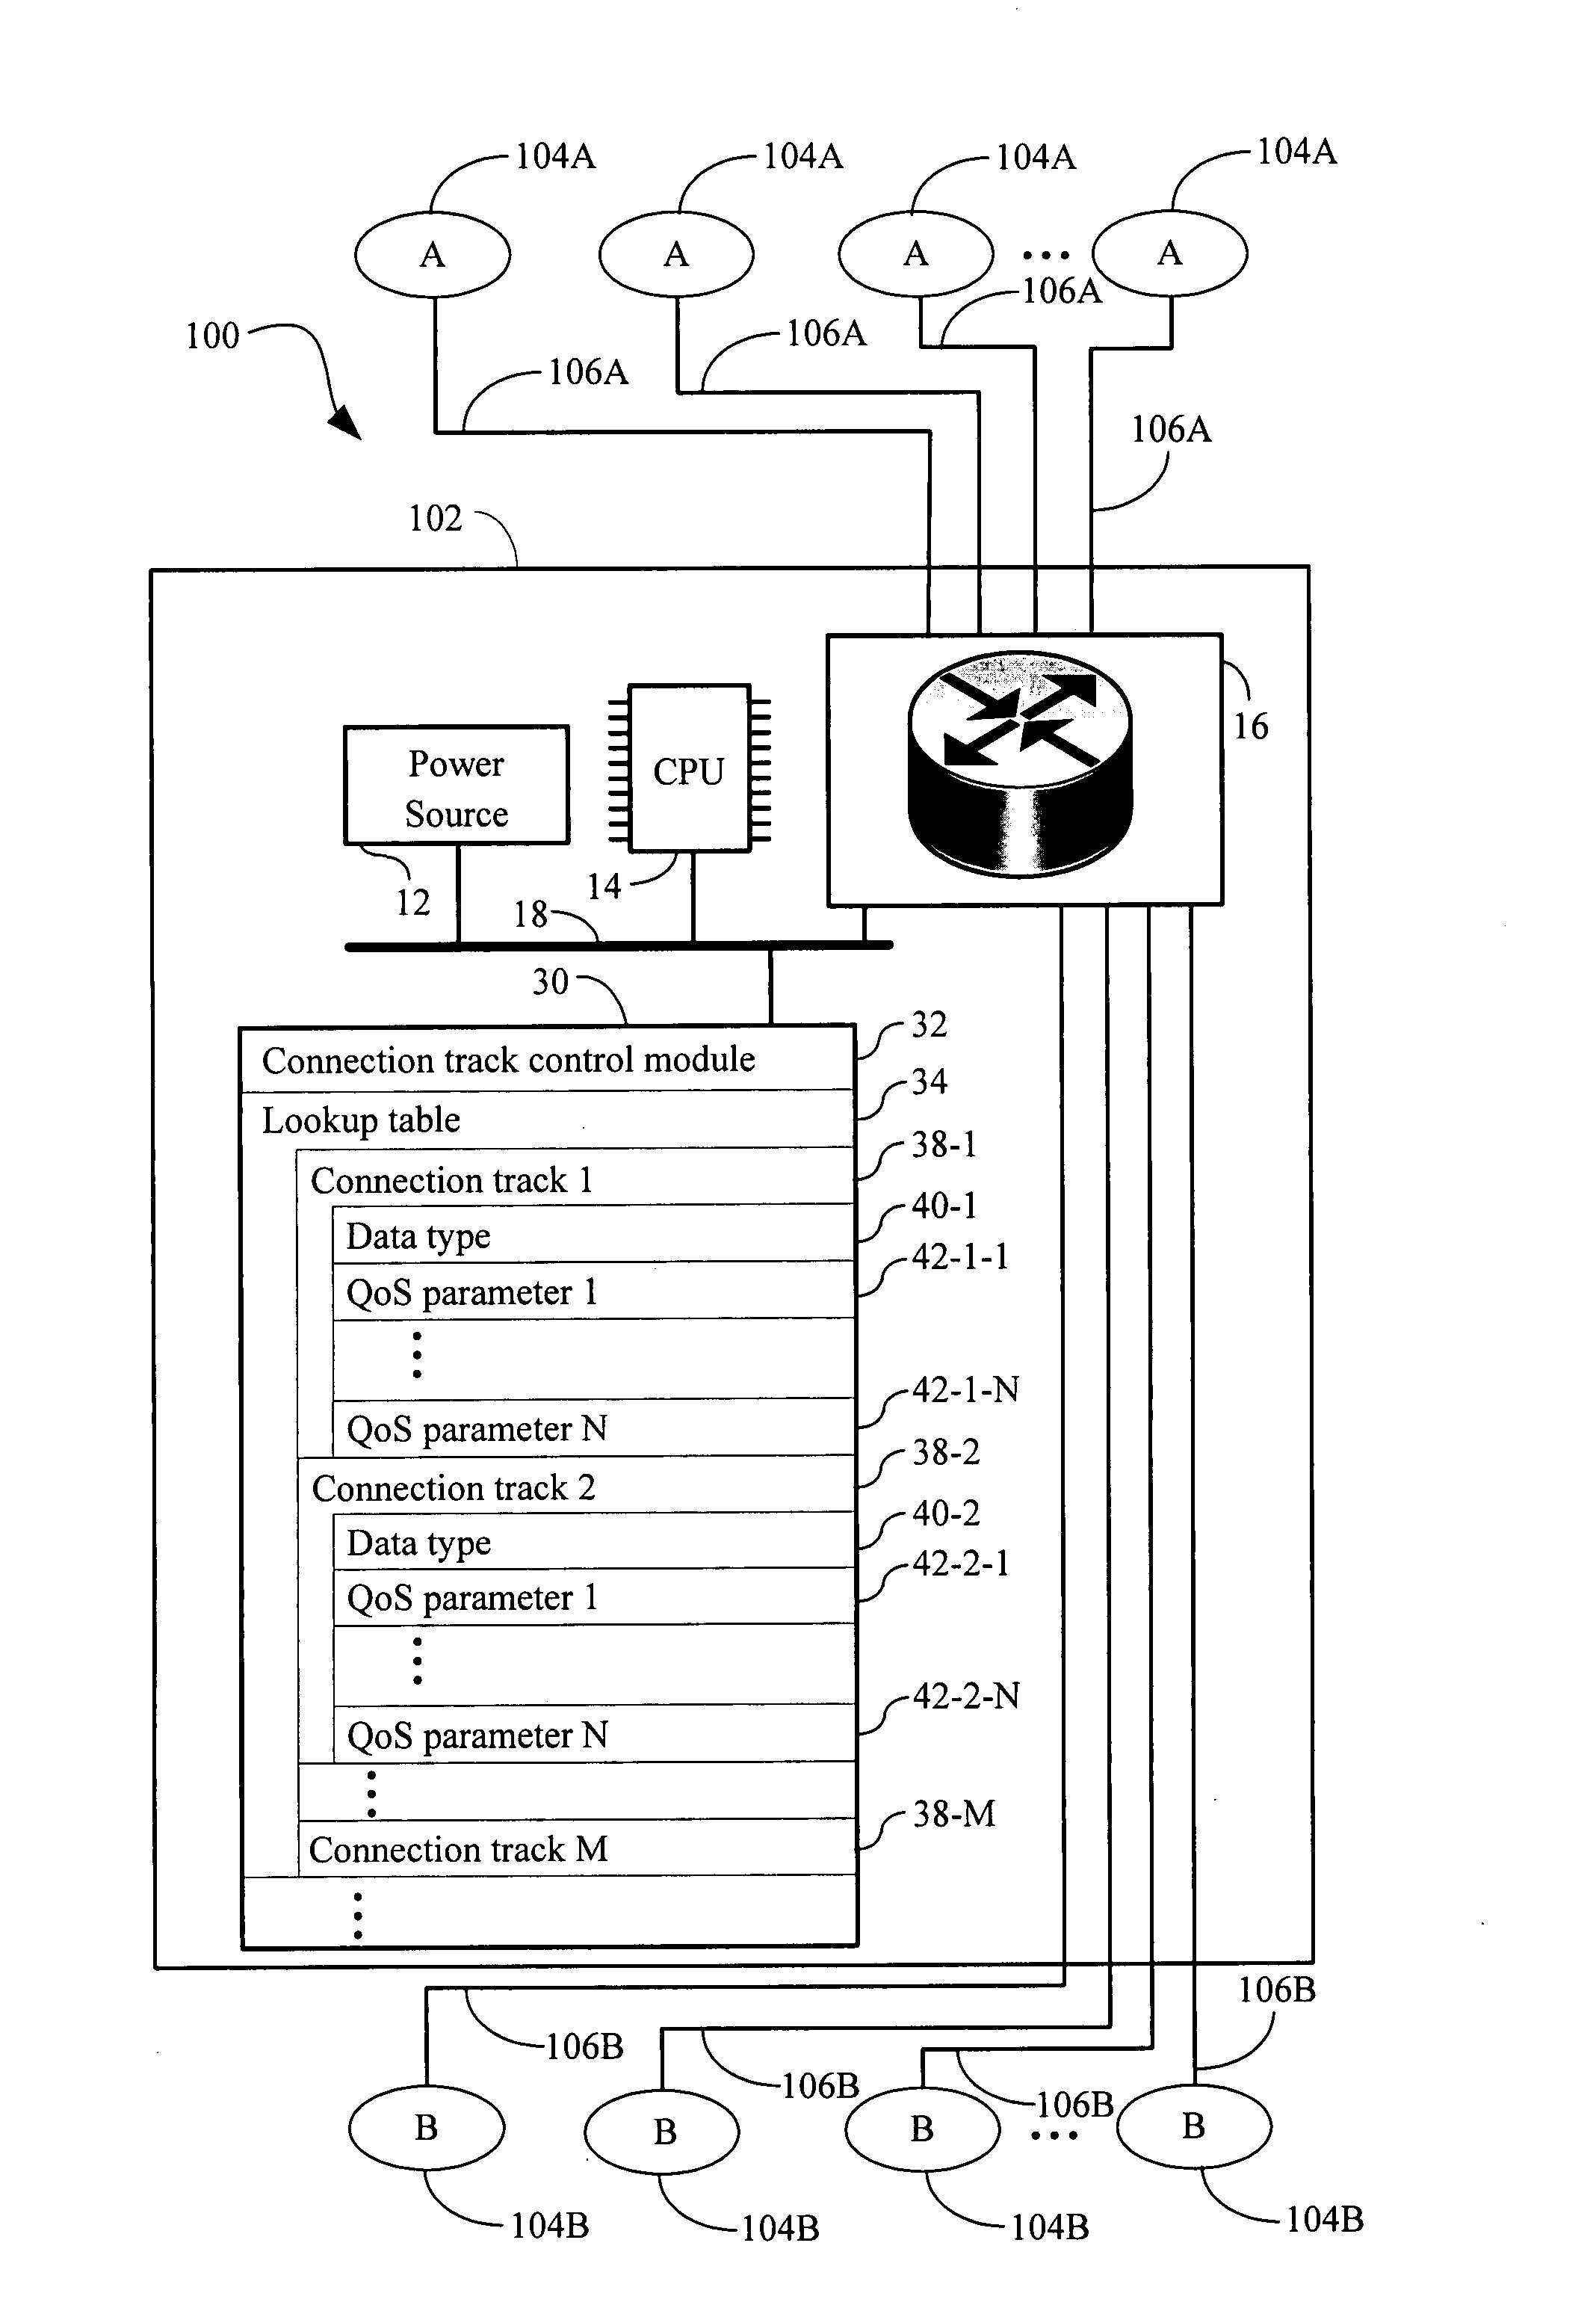 Systems and methods for dynamic quality of service